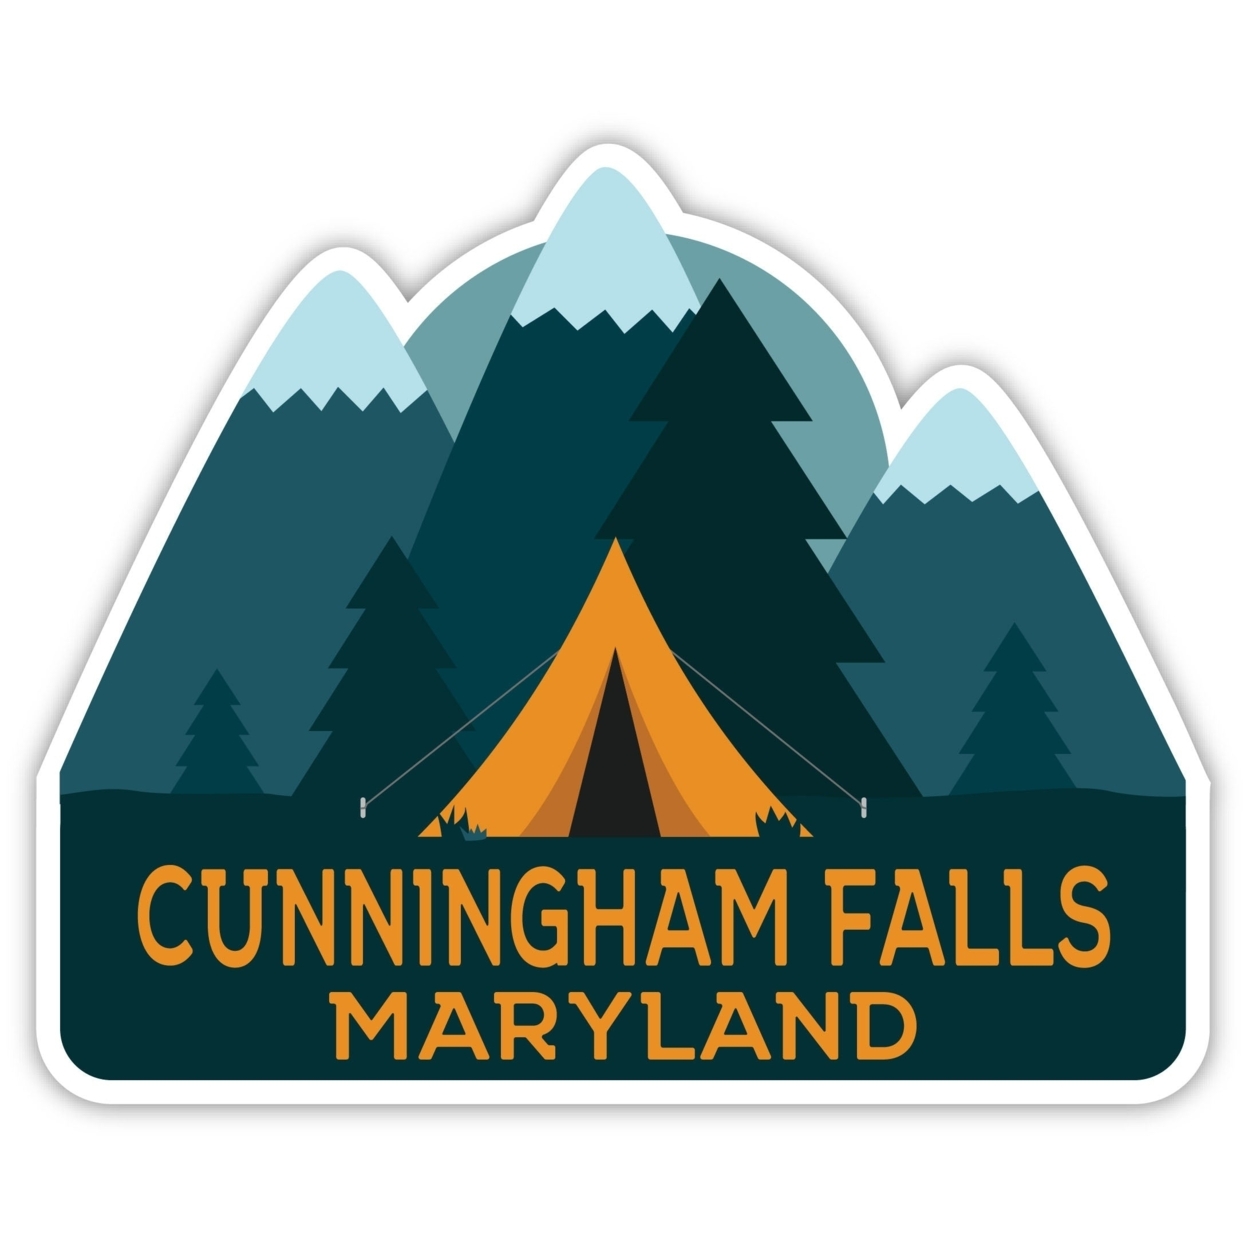 Cunningham Falls Maryland Souvenir Decorative Stickers (Choose Theme And Size) - Single Unit, 4-Inch, Tent